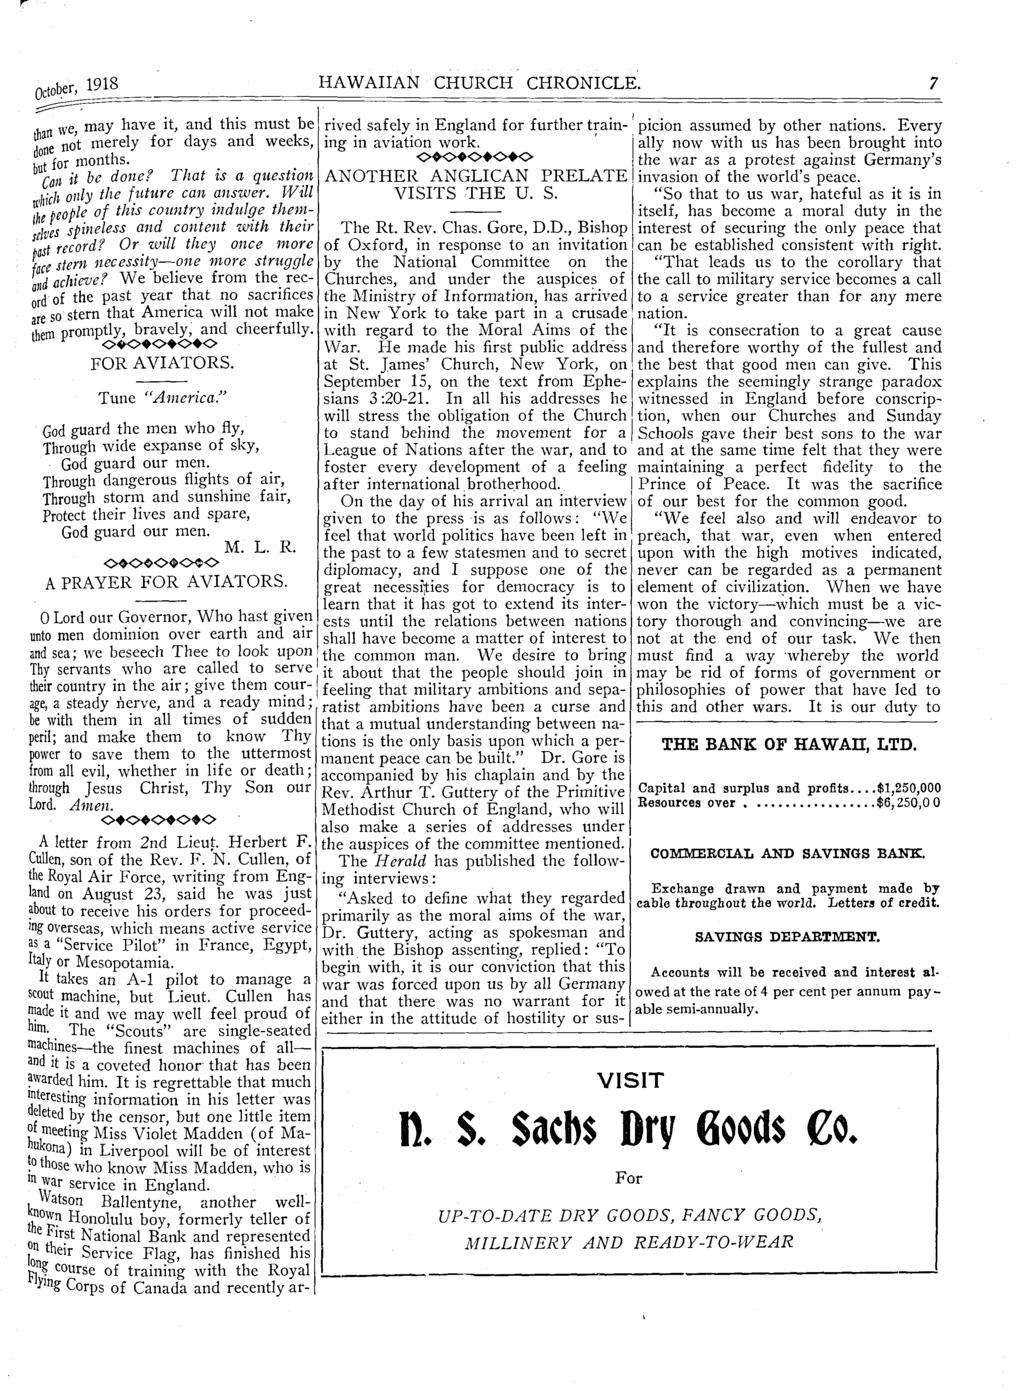 October, 1918 HAWAIIAN CHURCH CHRONICLE.. n we, m a y h a v e it, a n d t h is m u s t b e fn e not m e r e ly f o r d a y s a n d w e e k s, Л for m on th s. Con it be done? That is a question.